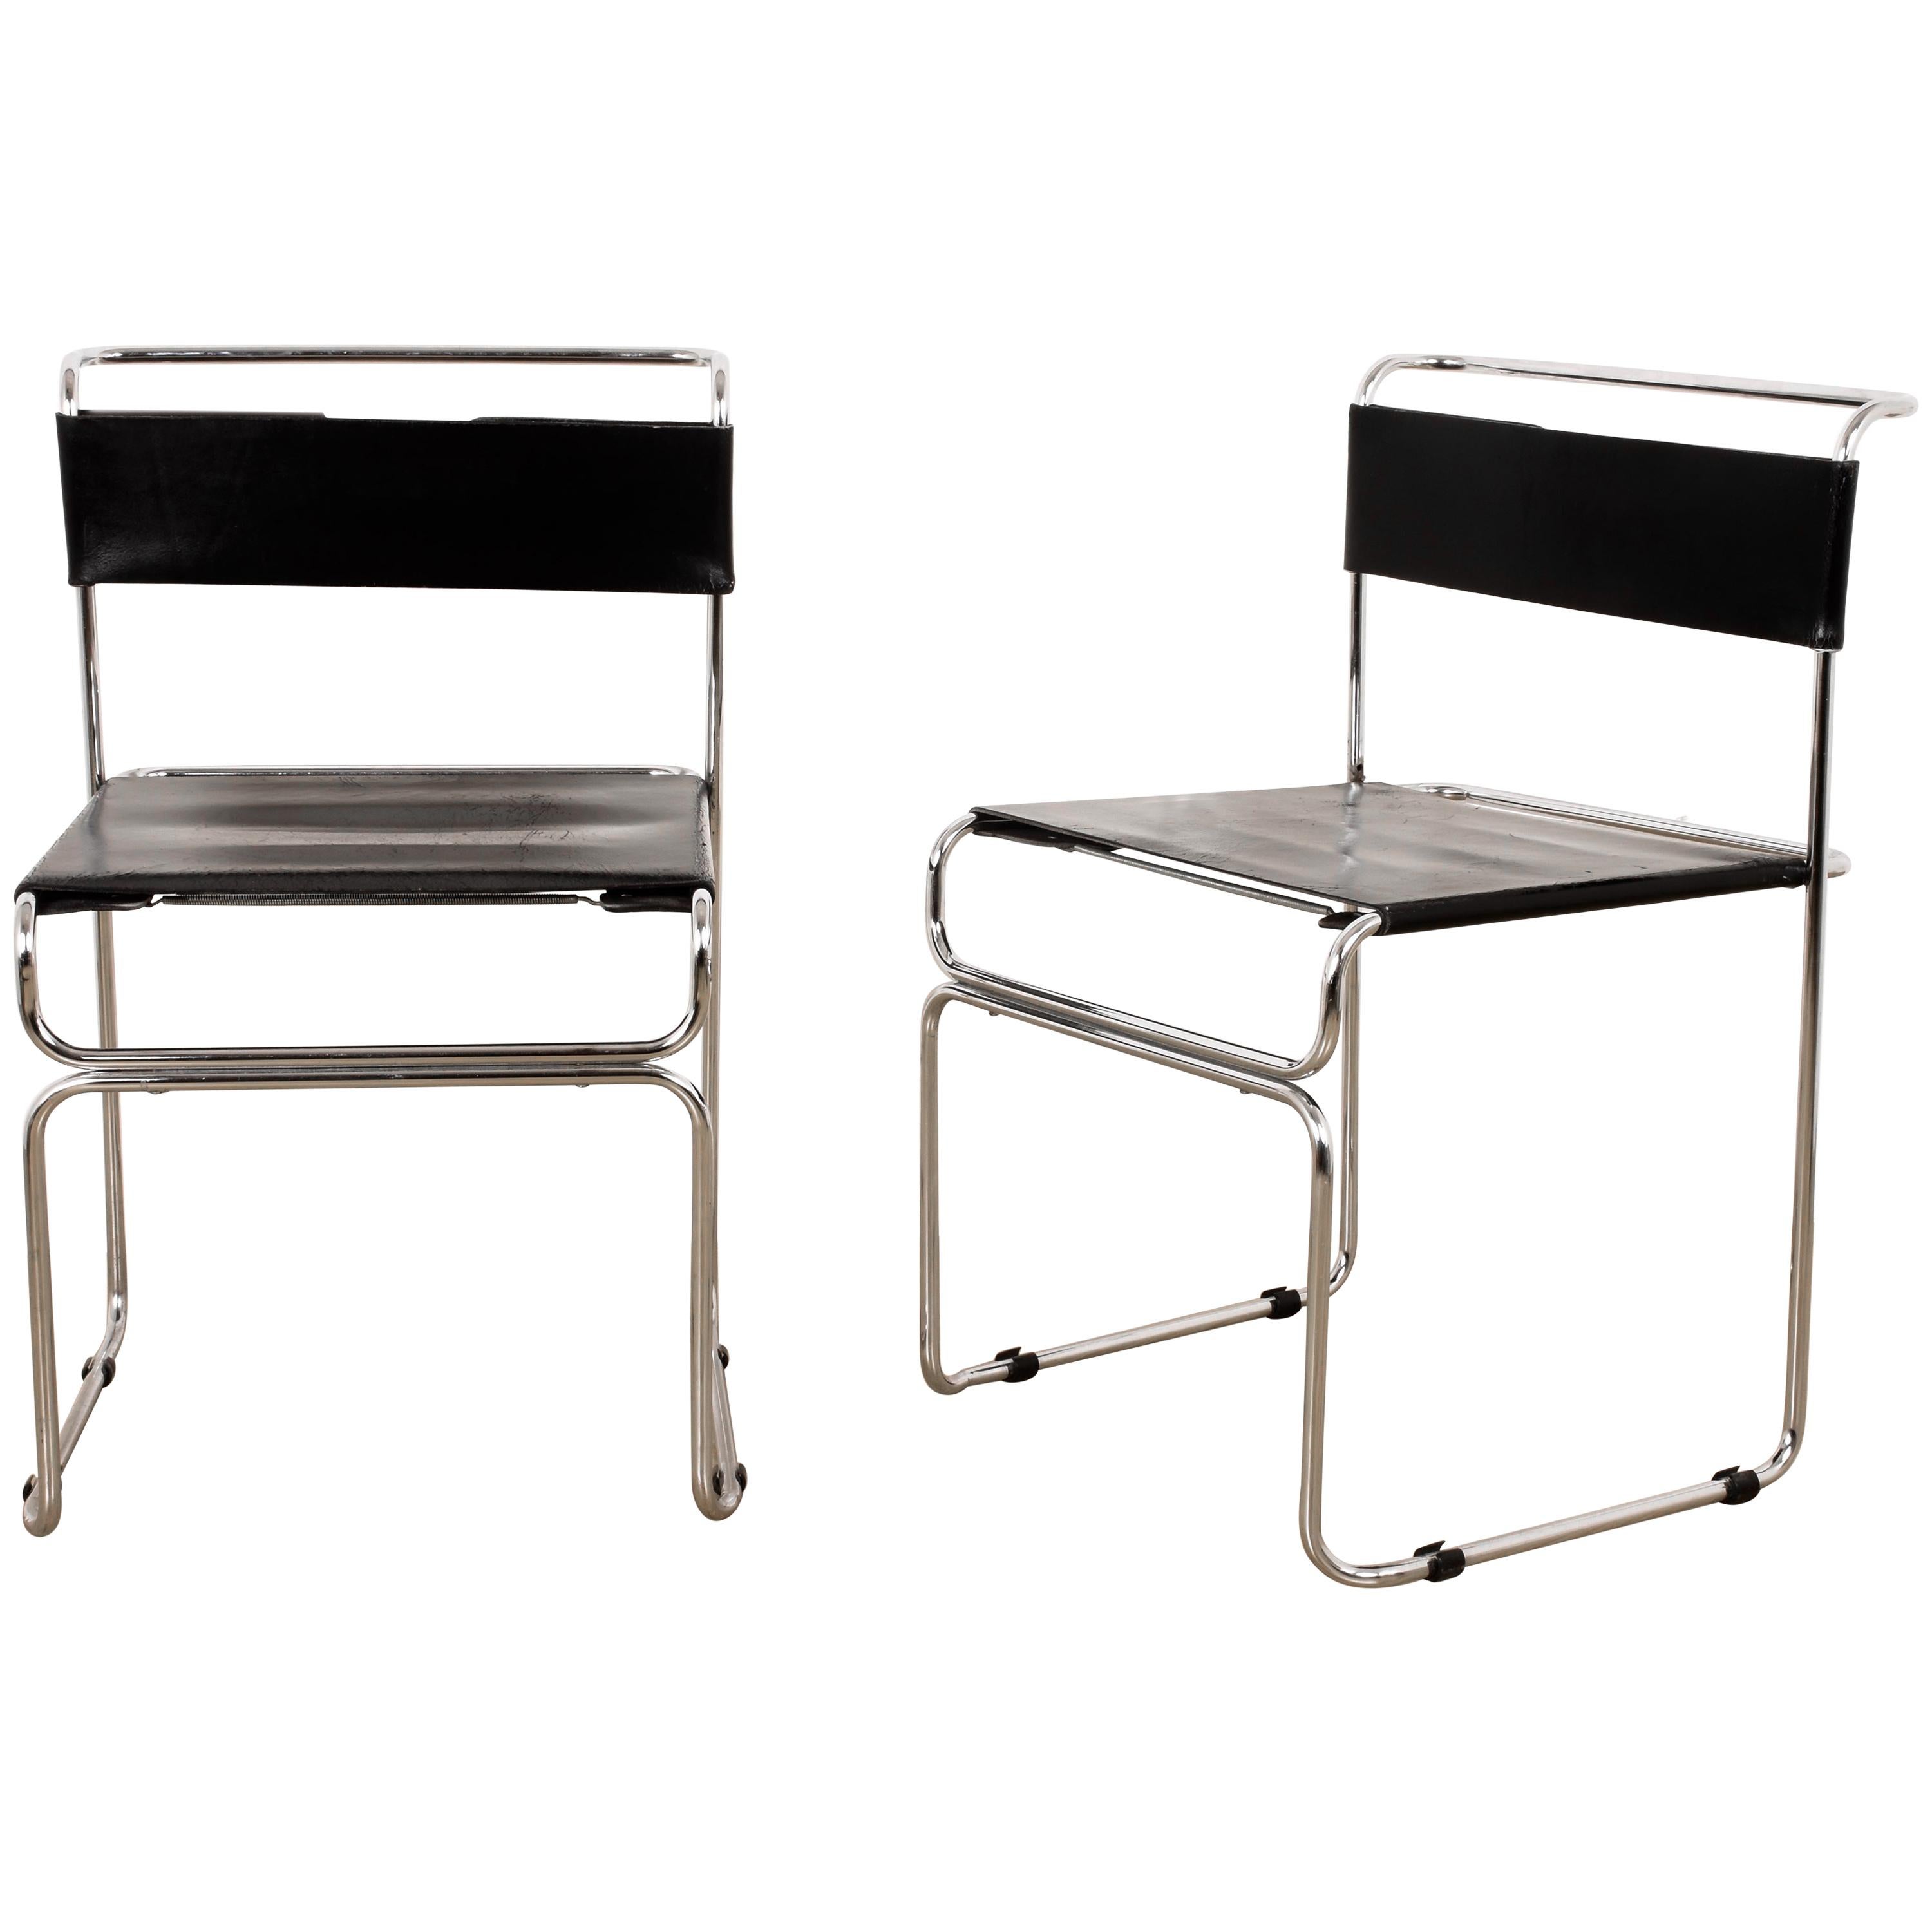 Two Chairs by Giovanni Carini for Planula in Steel and Leather, Italy, 1970s For Sale